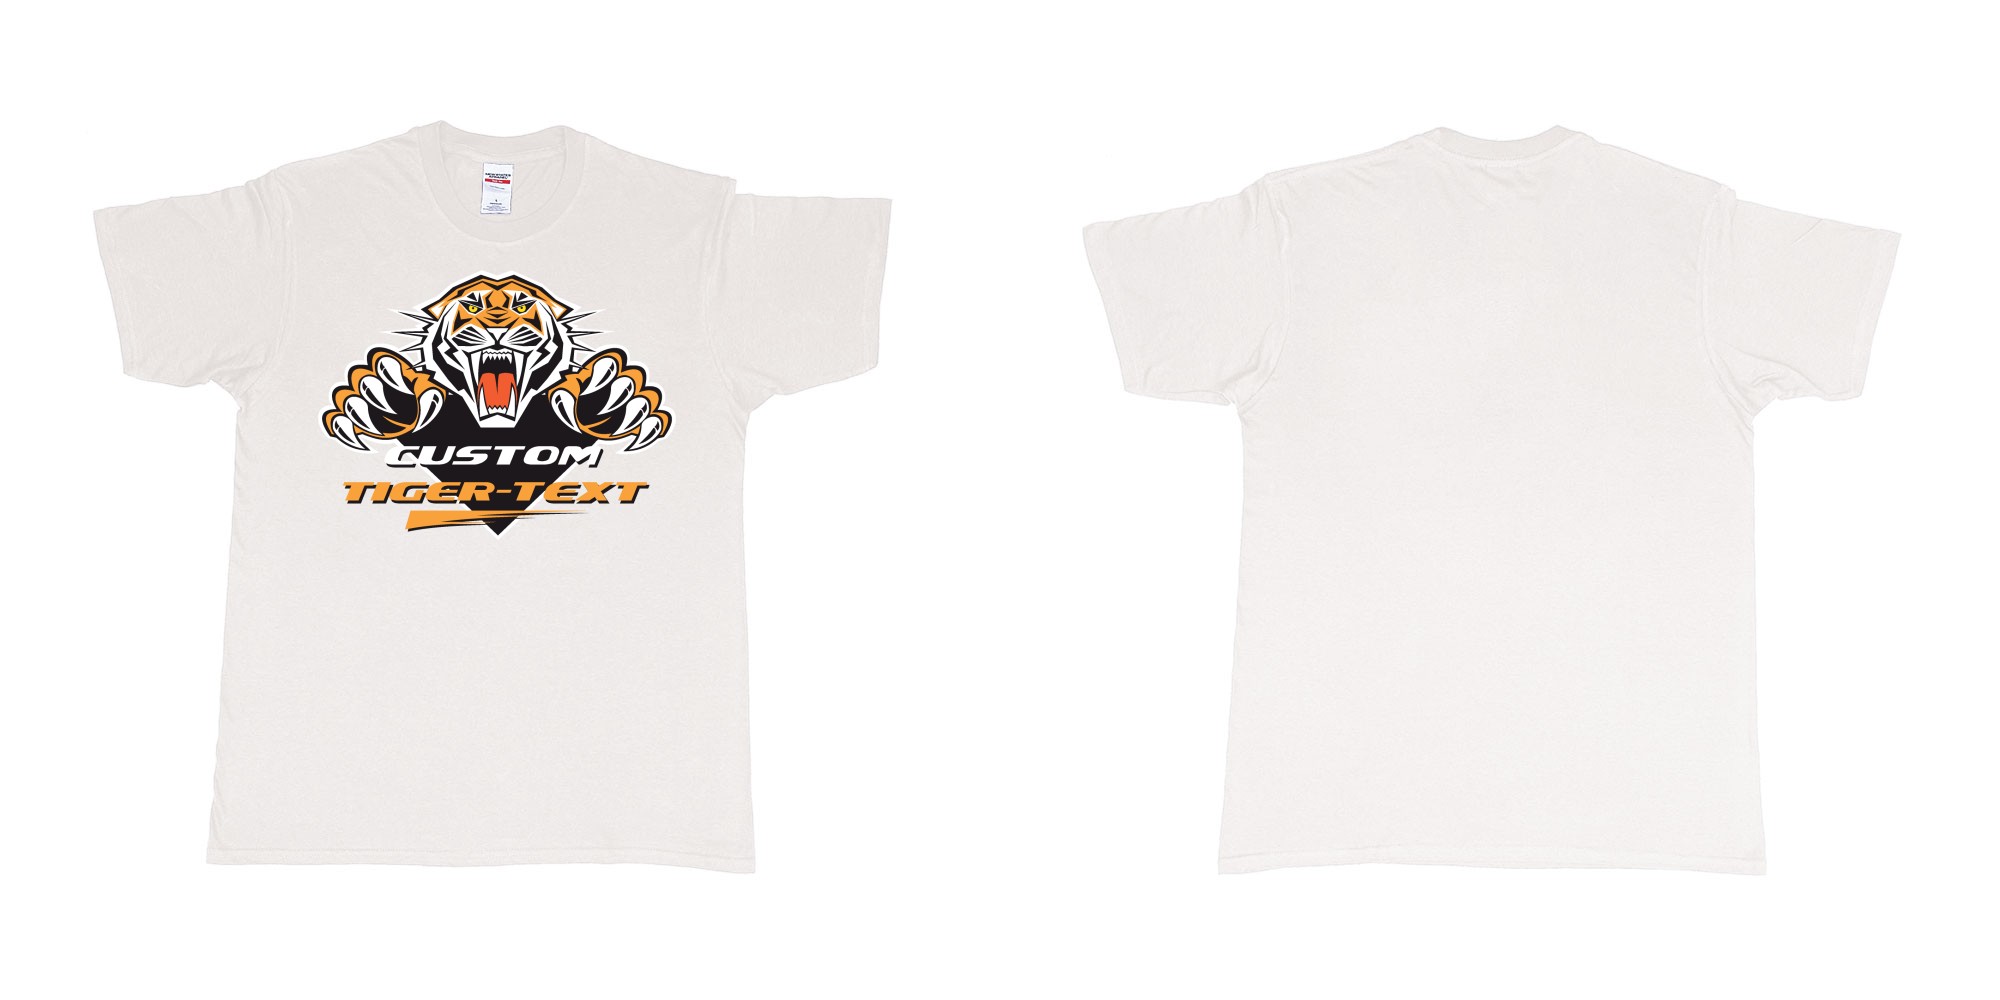 Custom tshirt design the wests tigers sydney national rugby league custom tshirt print in fabric color white choice your own text made in Bali by The Pirate Way